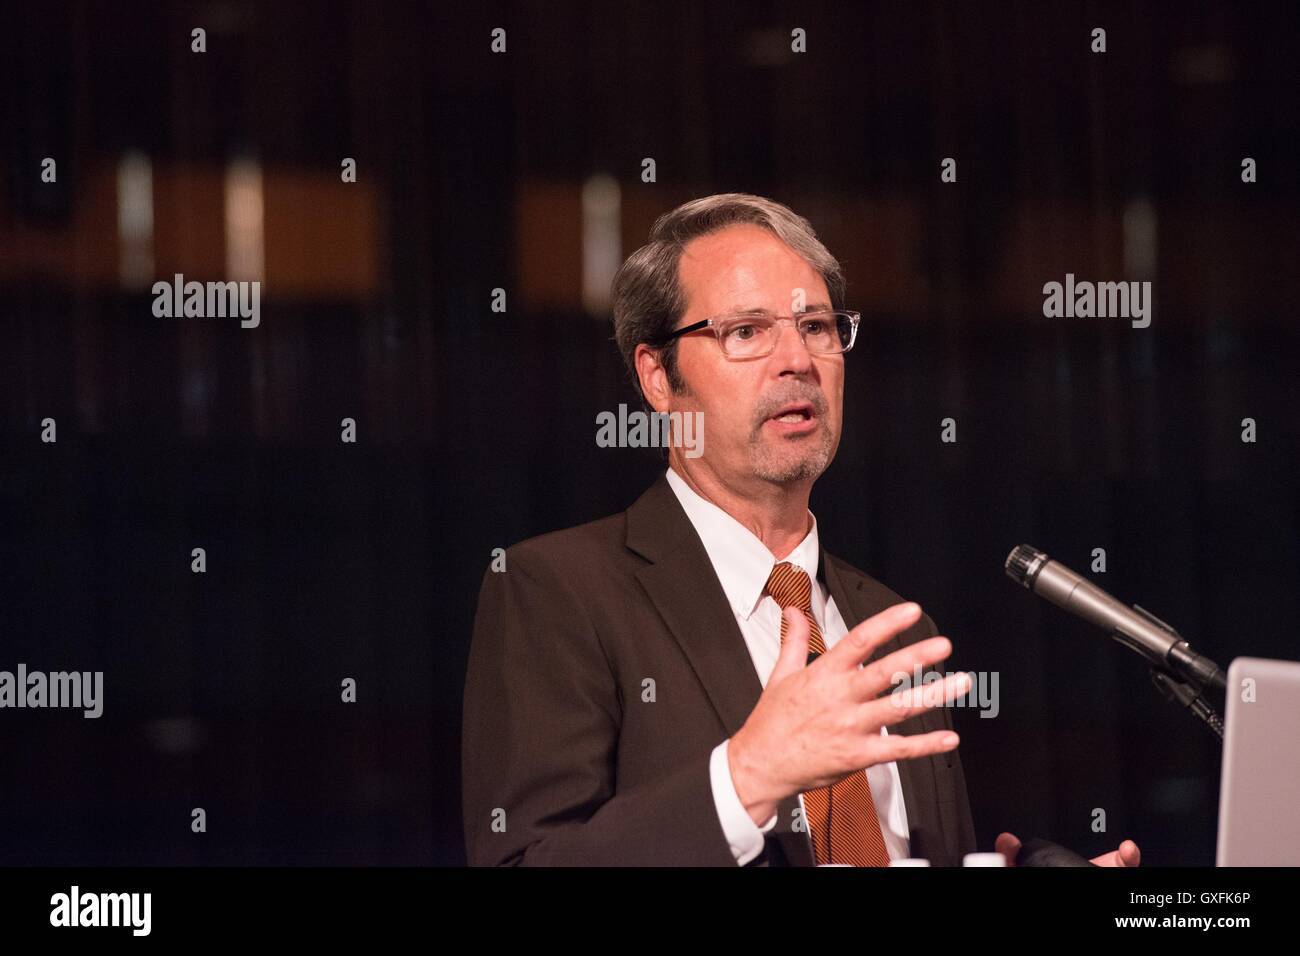 Austin City Demographer Ryan Robinson speaks about the new city council electoral process during a discussion at the LBJ Presidential Library October 7, 2014 in Austin, Texas. Stock Photo